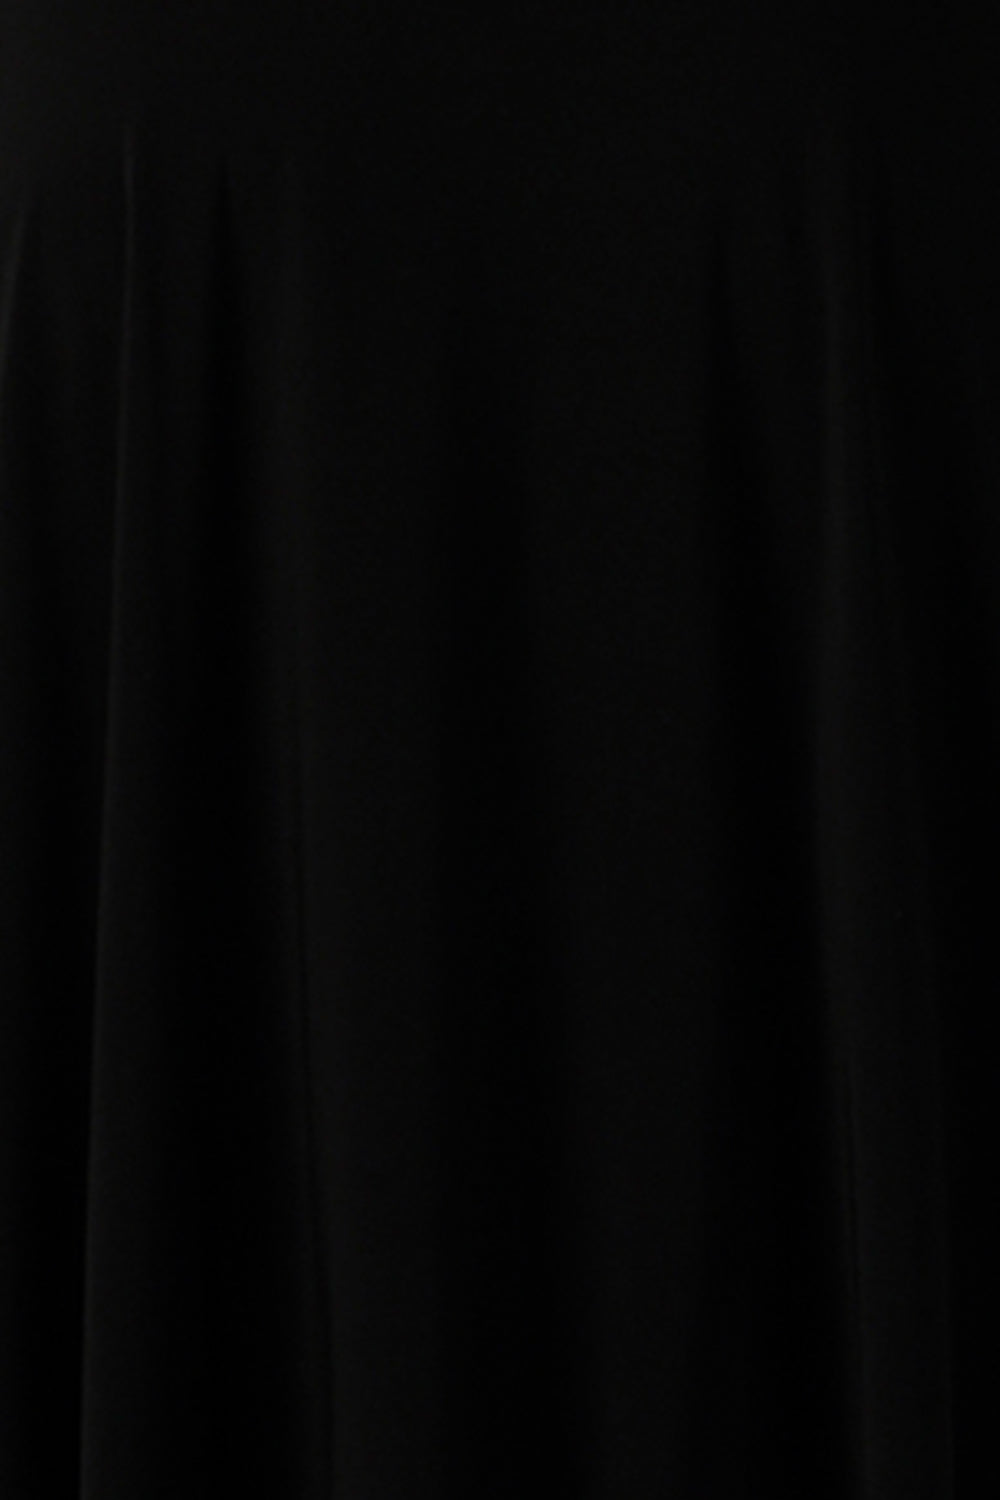 Black jersey fabric made in Australia for women size 8 - 24.